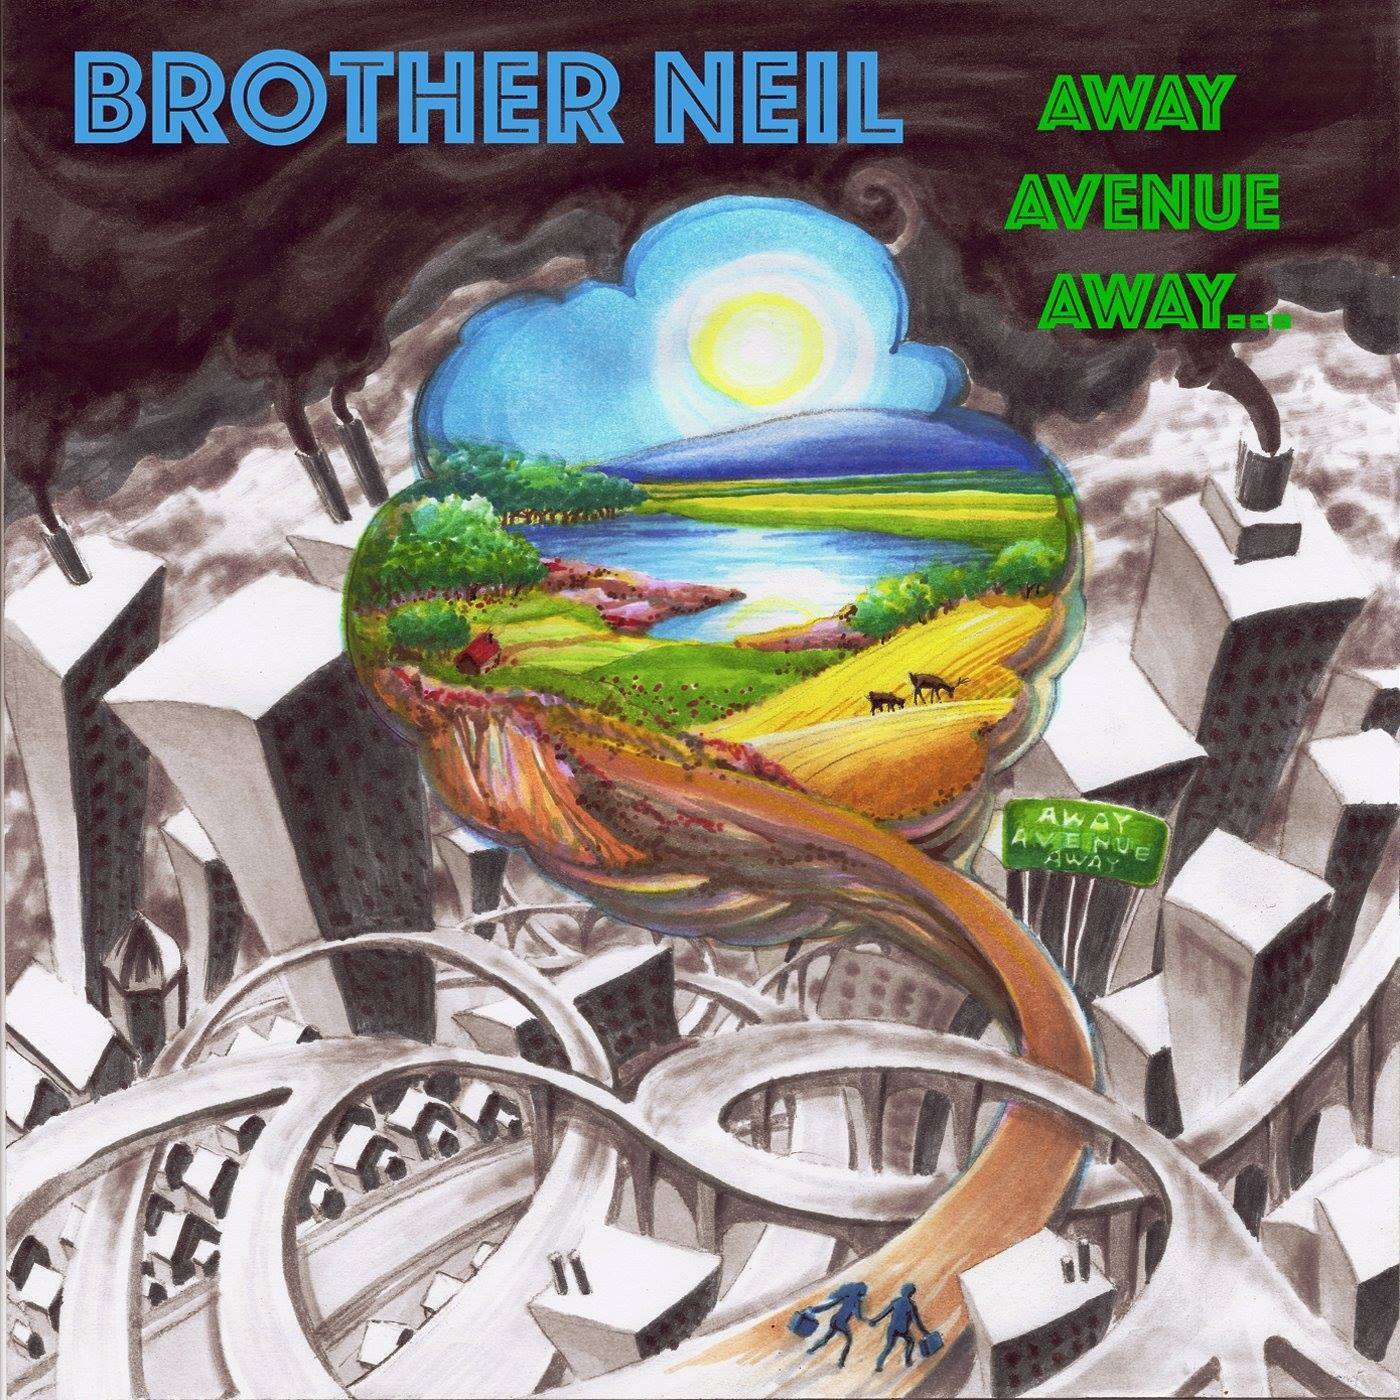 Brother Neil to release Away Avenue Away